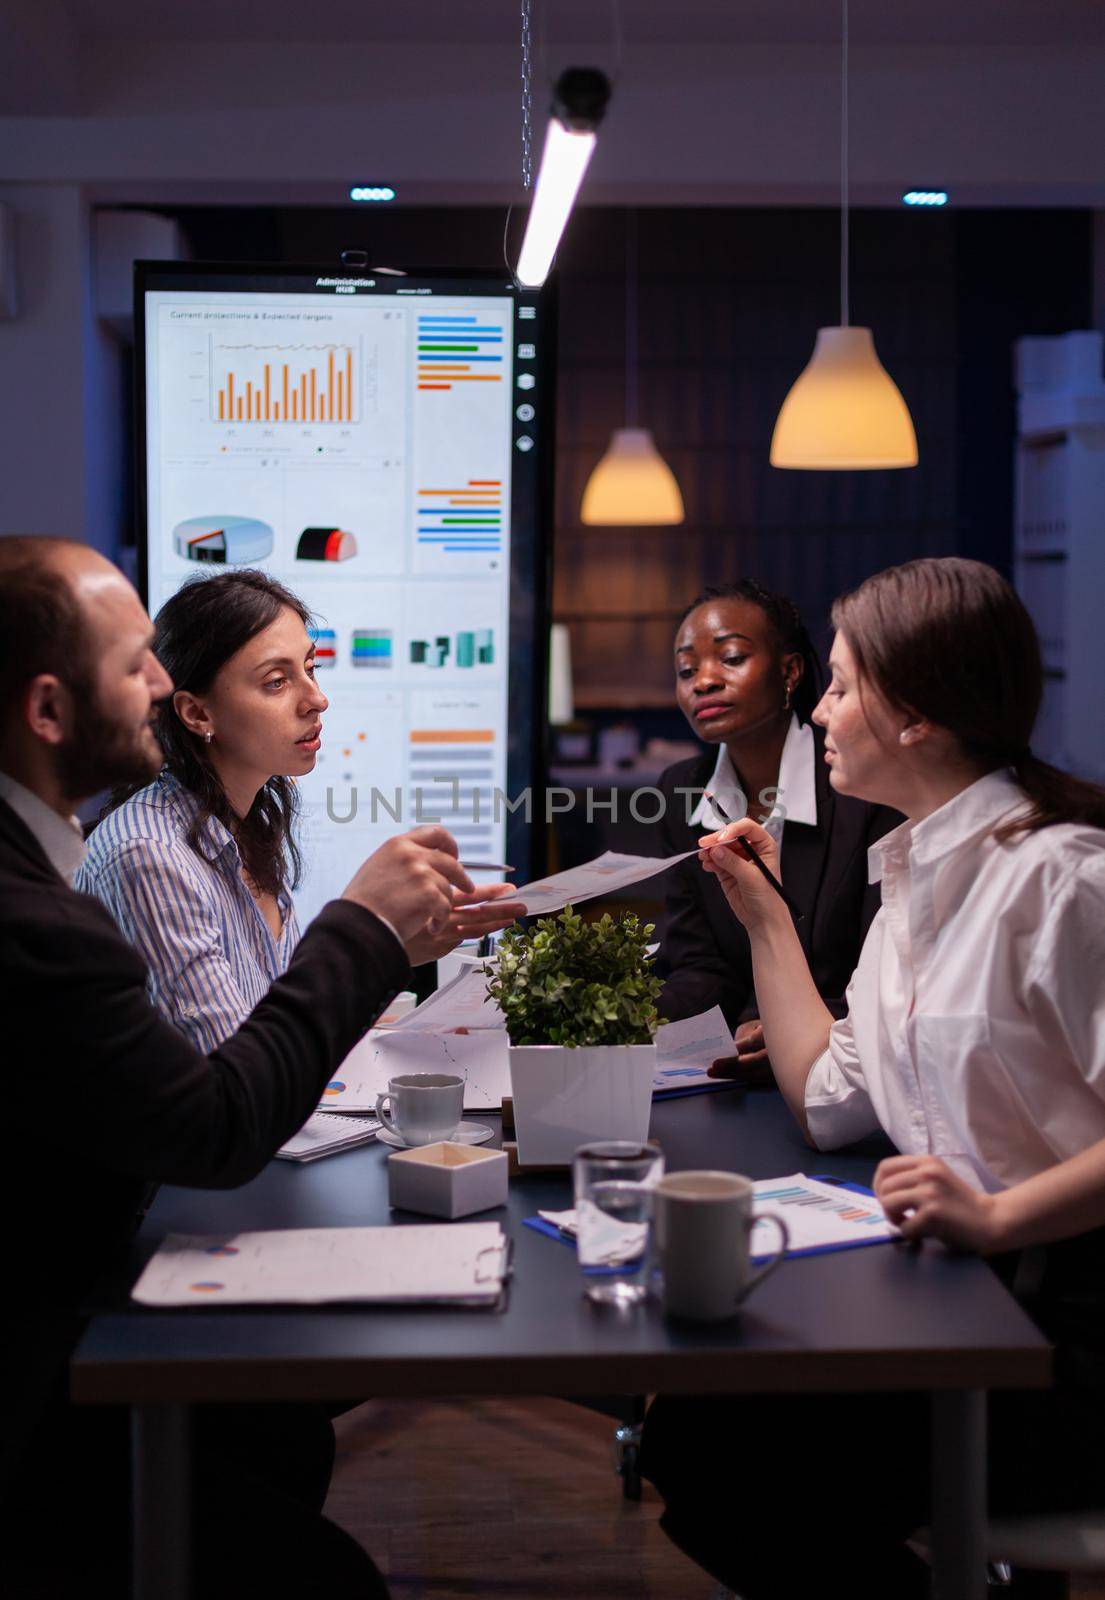 Businesswoman leder sitting at desk analyzing marketing presentation discussing financial graps paperwork. Diverse multi-ethnic teamwork brainstorming project ideas working in meeting room late night